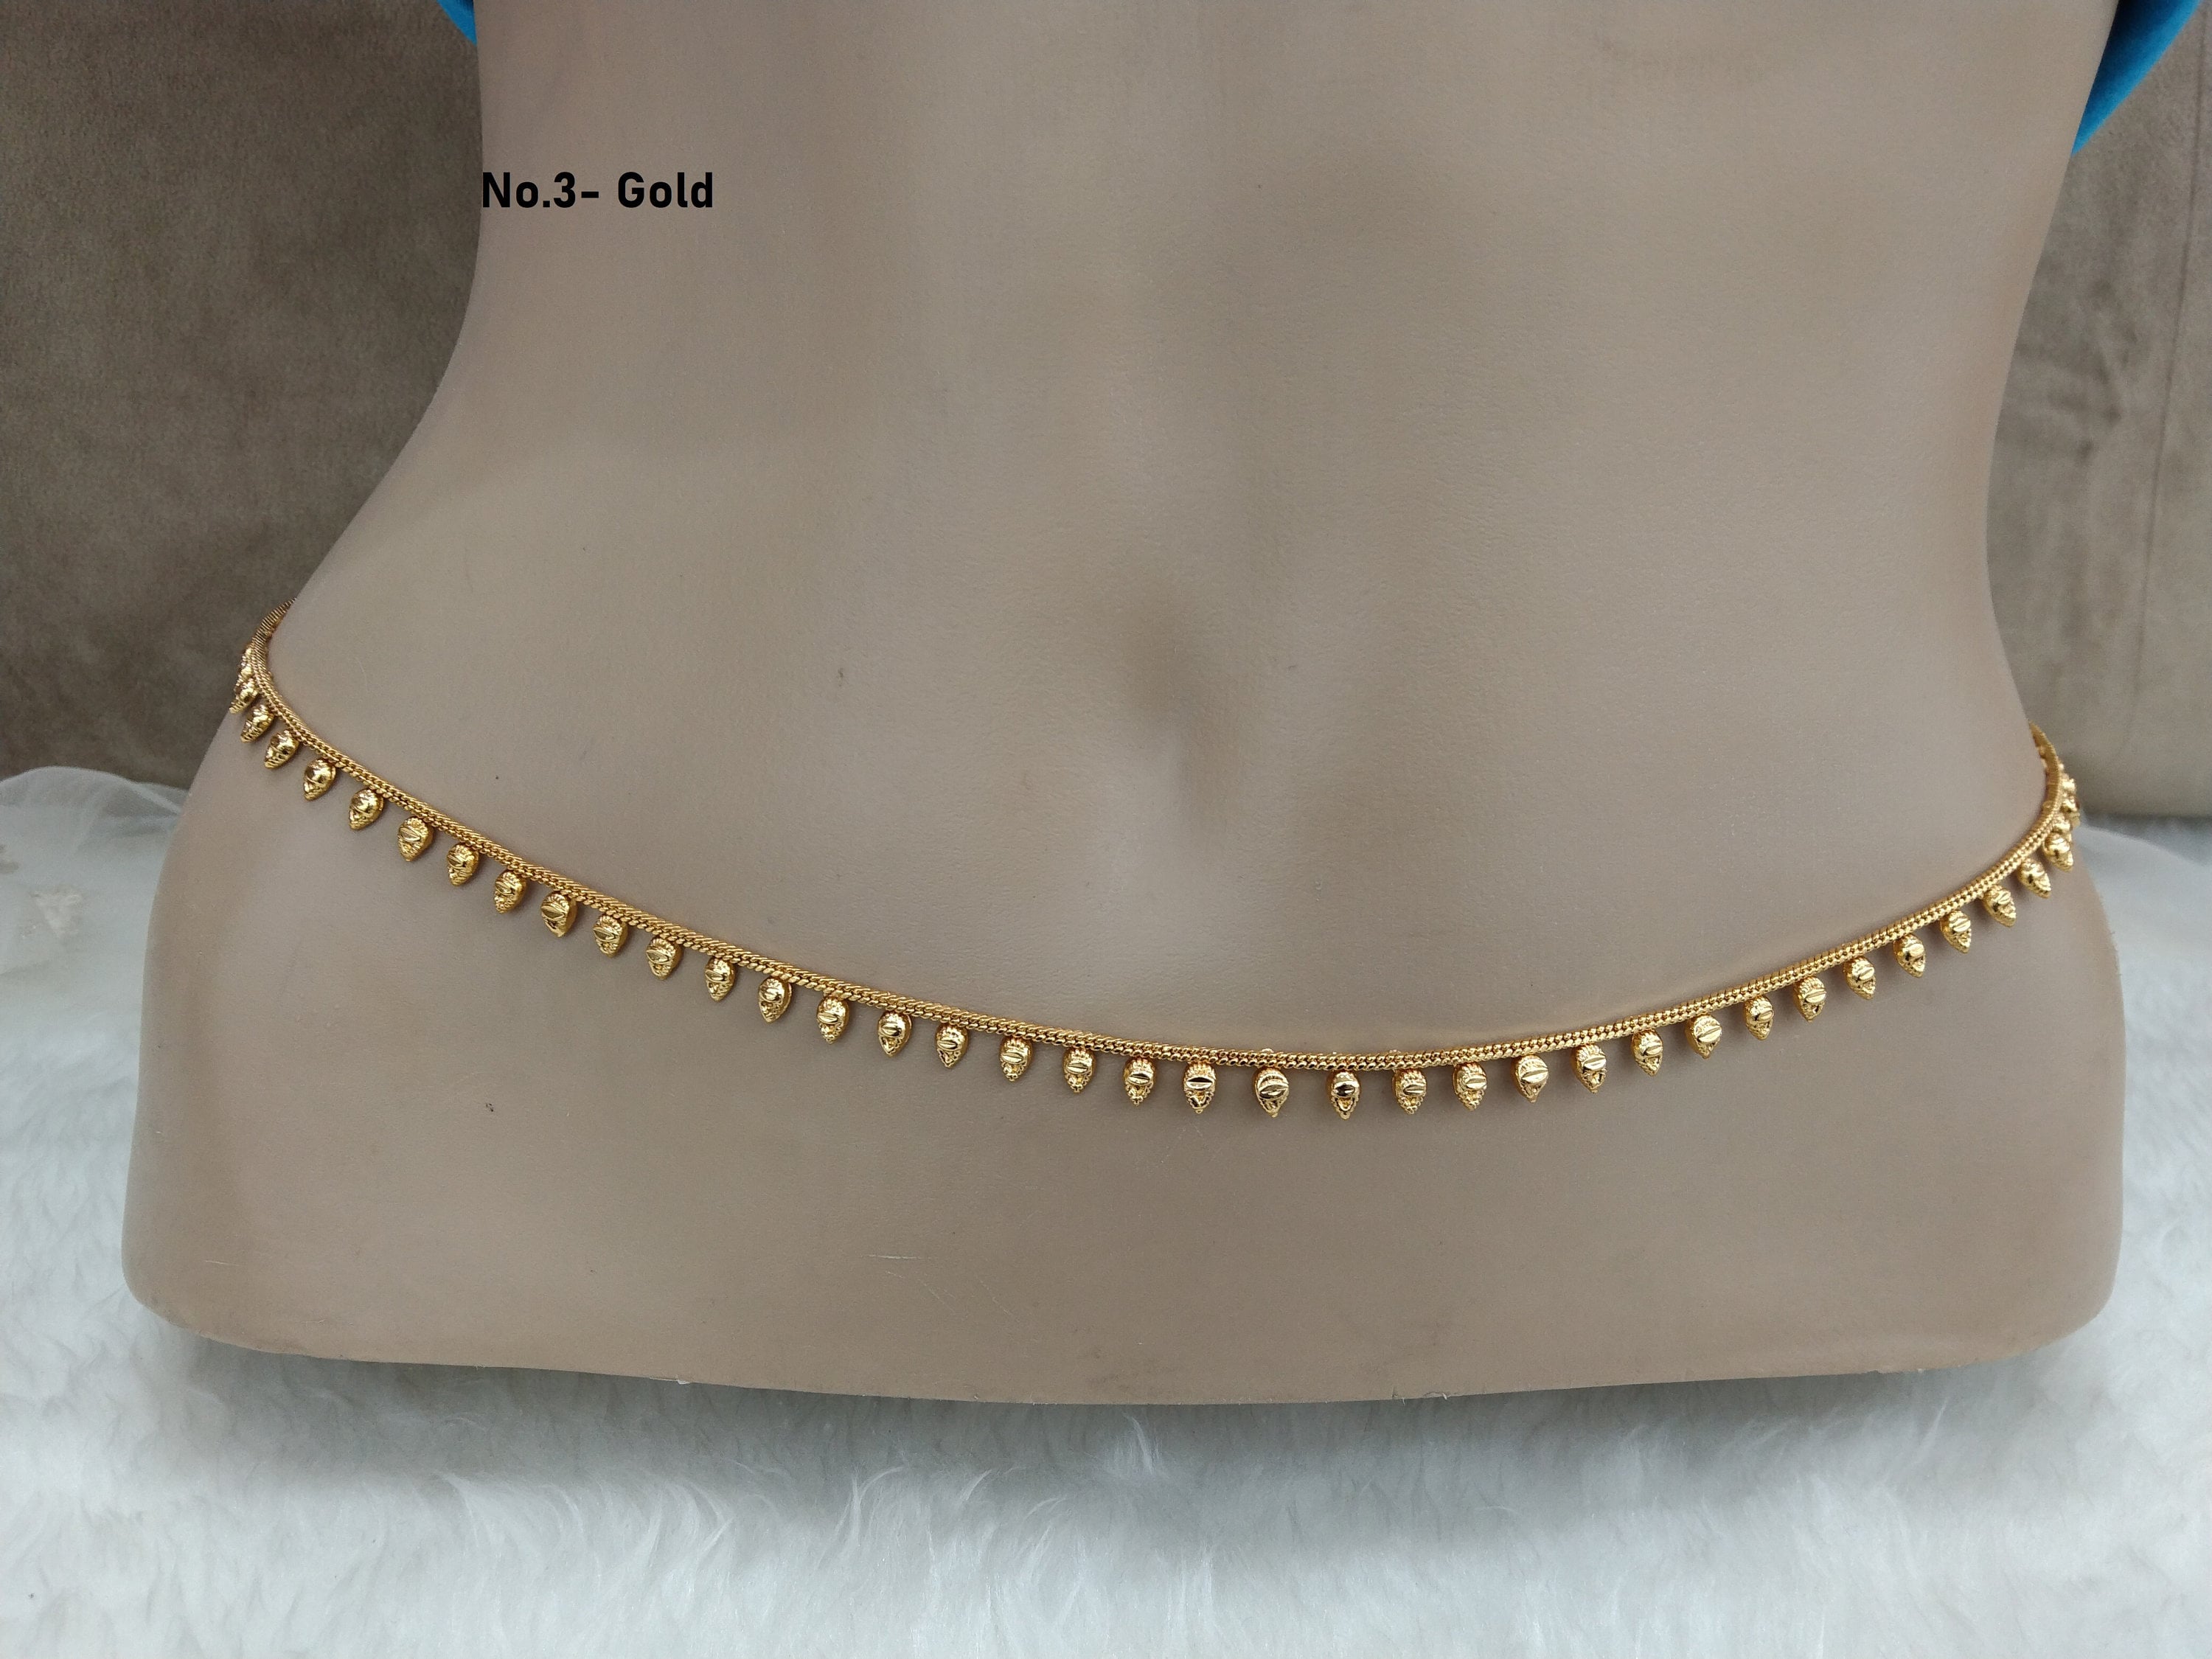 Girls Chain Design Waist Belt Gold Silver Adjustable for Ladies Dresses  Outfits